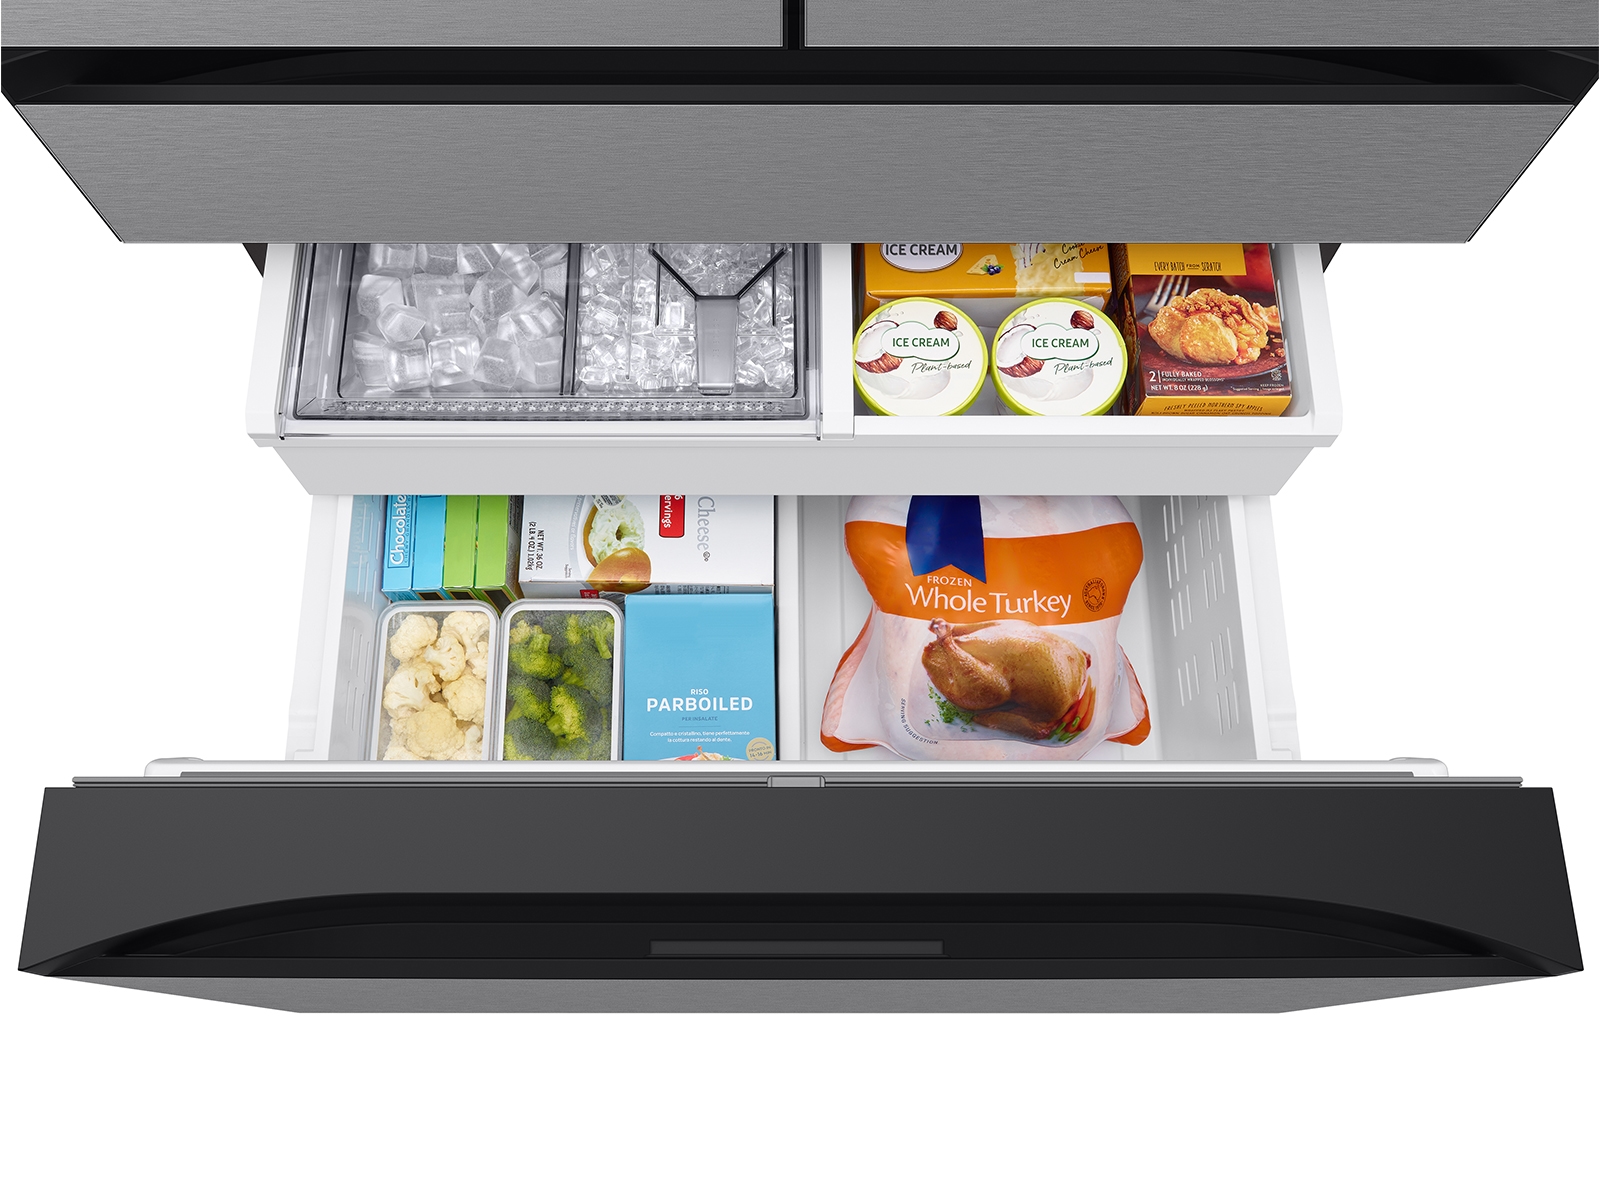 Samsung's Wi-Fi oven and touchscreen fridge join the CNET Smart